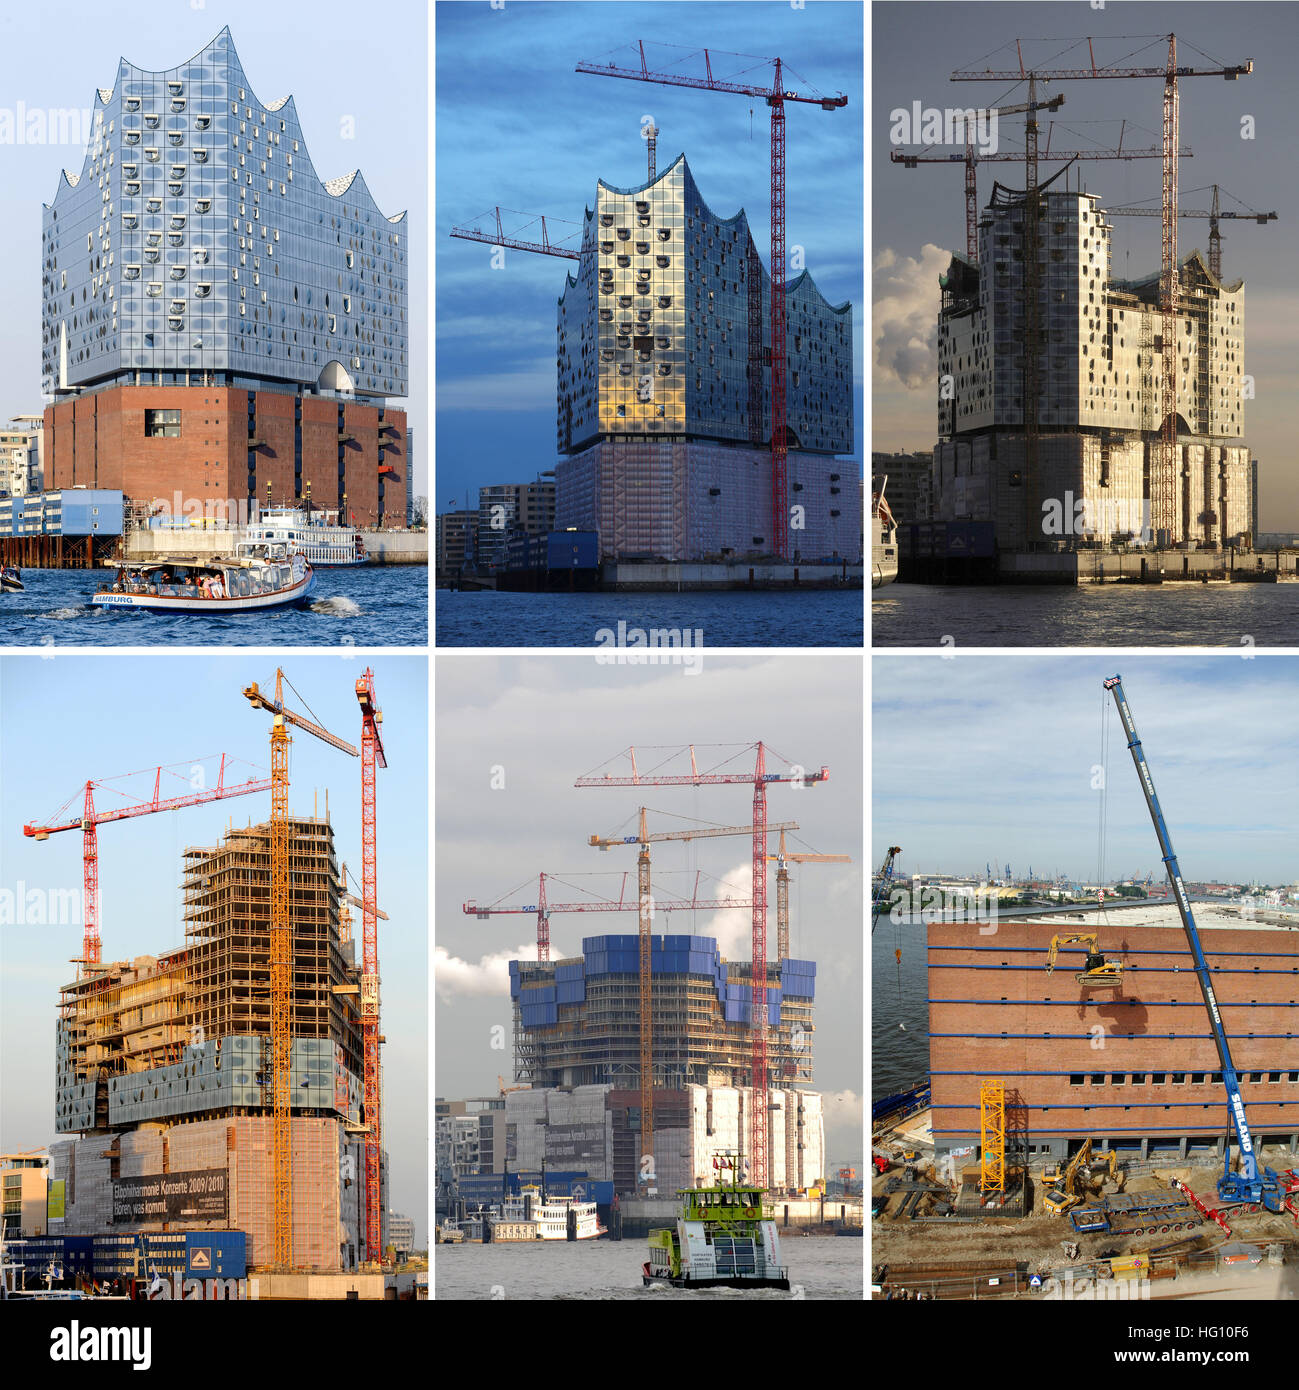 Hamburg, Germany. 07th May, 2016. ARCHIVE - A series of archival images show the construction of the Elbe Philharmonic Hall in Hamburg, Germany. From bottom right to left: the images are dated 2007, 2009, 2010, 2010, 2014, 2016. The Hanseatic harbour city's concert hall is due to be opened on the 11 January 2017. Photo: dpa/Alamy Live News Stock Photo